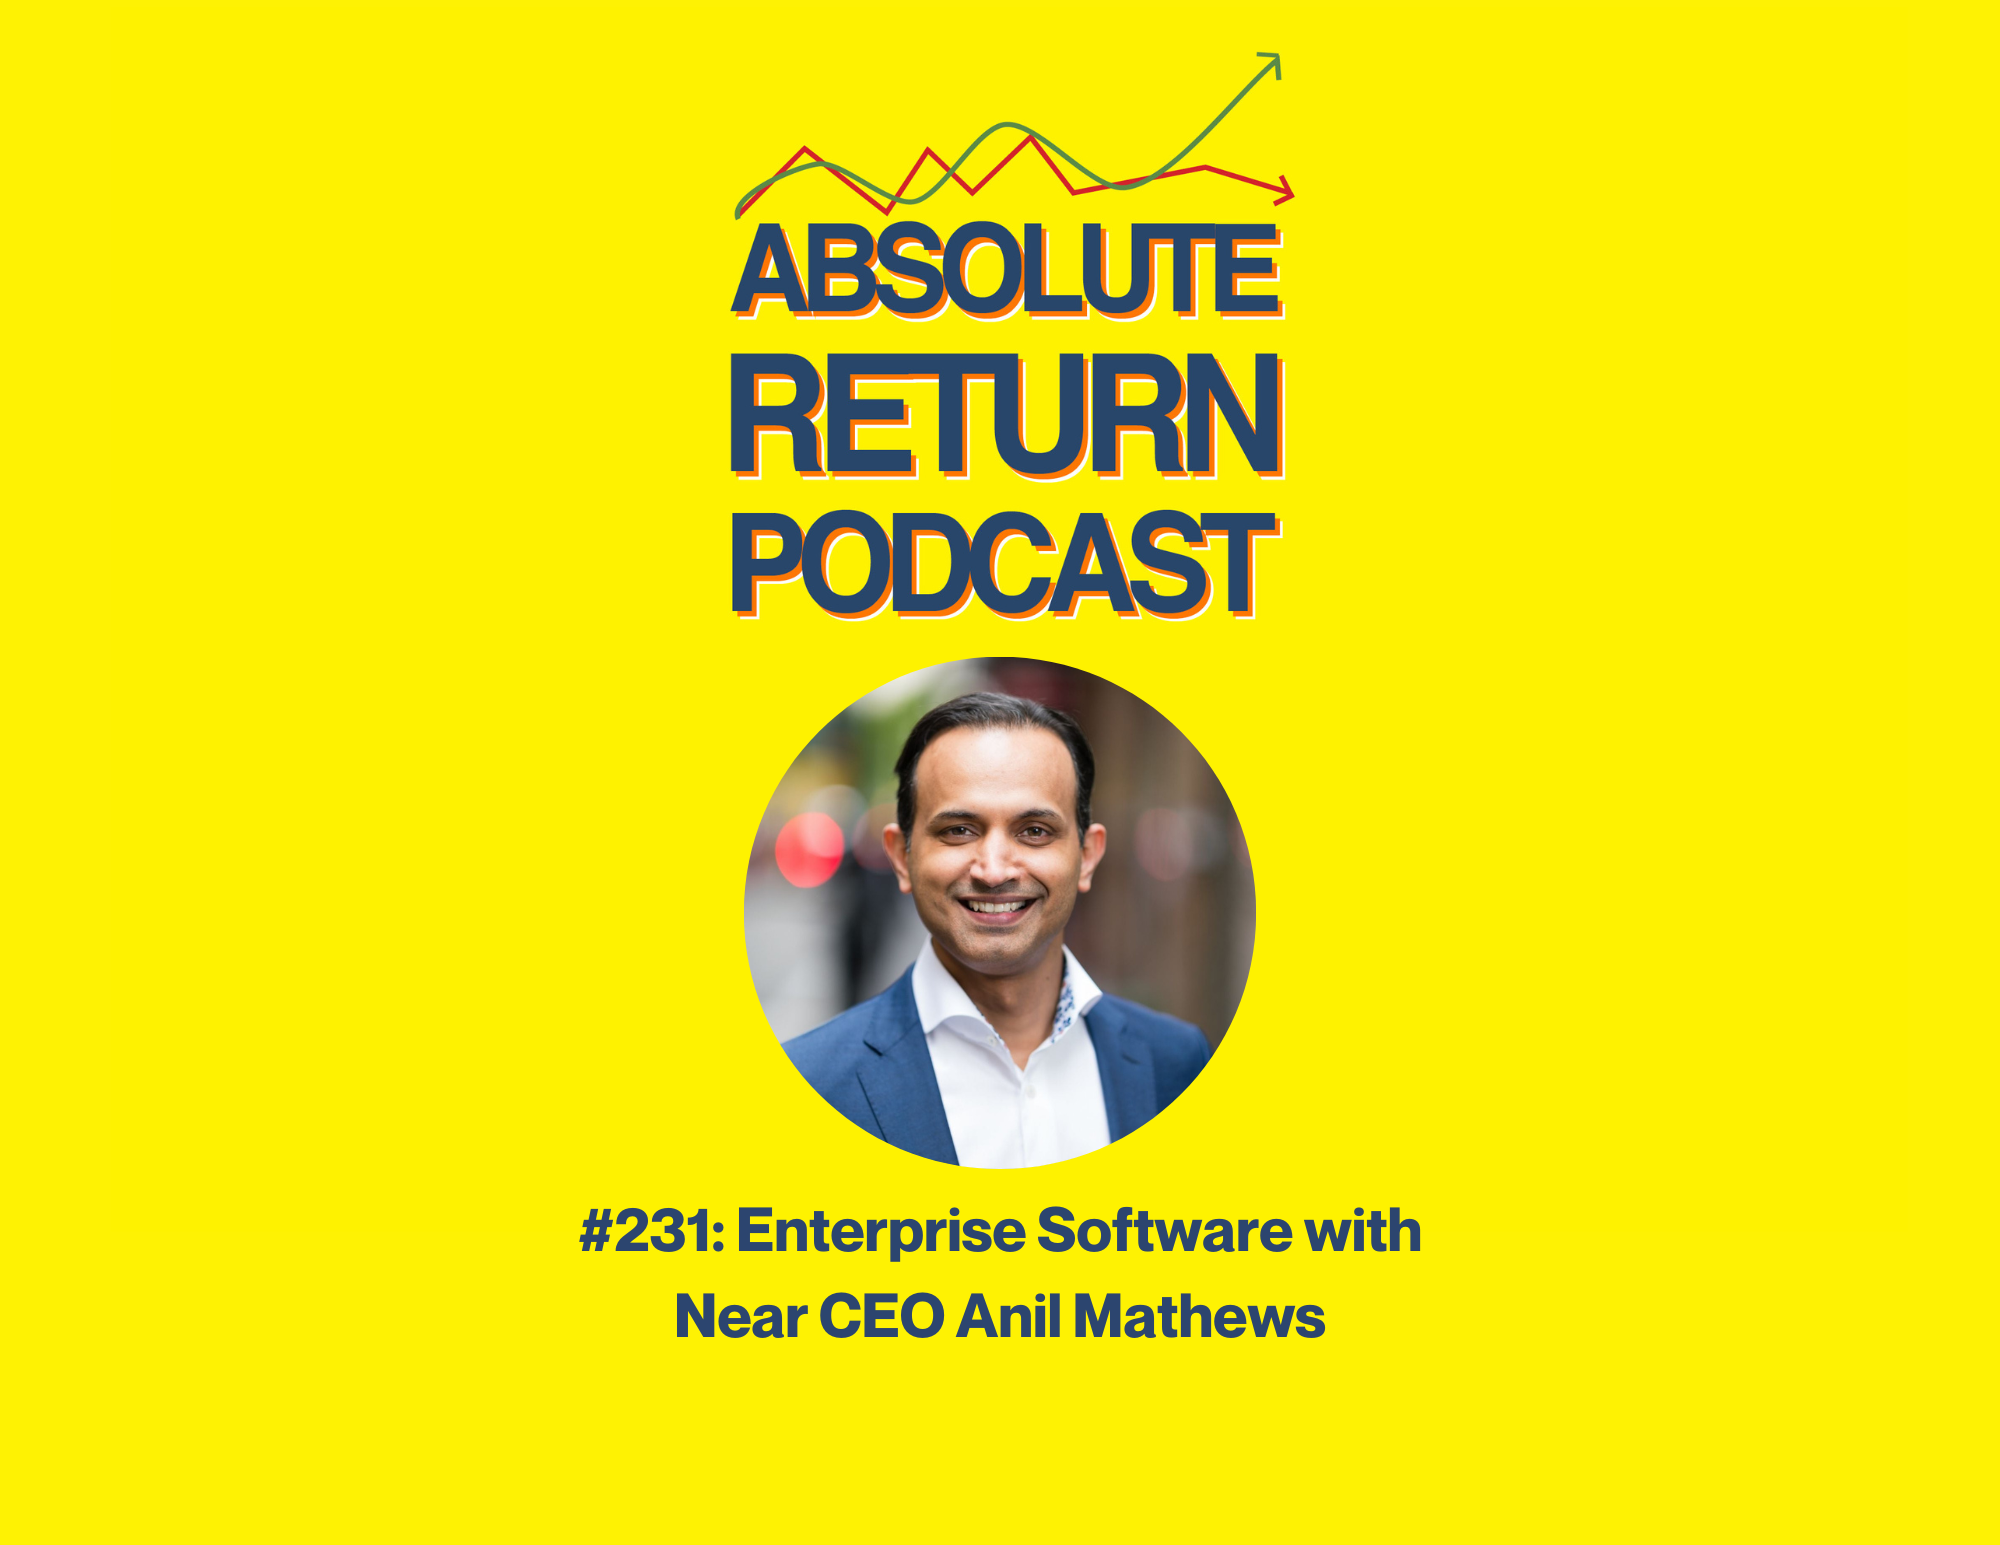 Absolute Return Podcast #231: Enterprise Software with Near CEO Anil Mathews